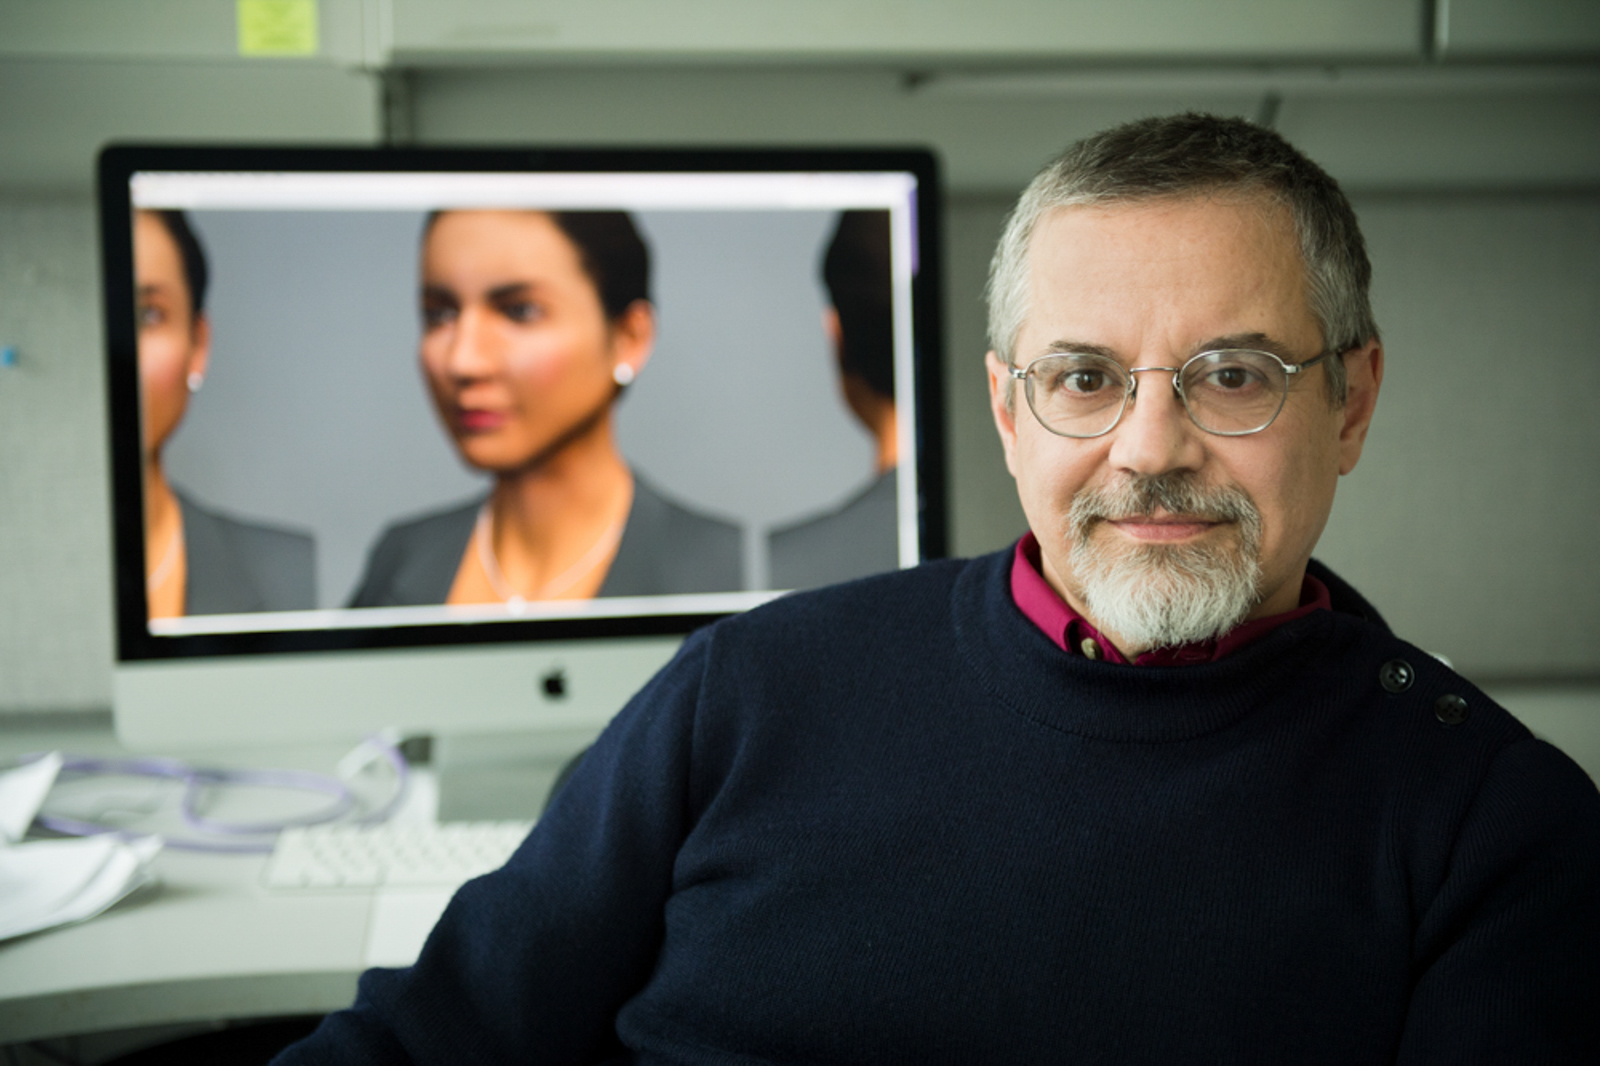 Portrait of professor with his work shown in a computer in the background